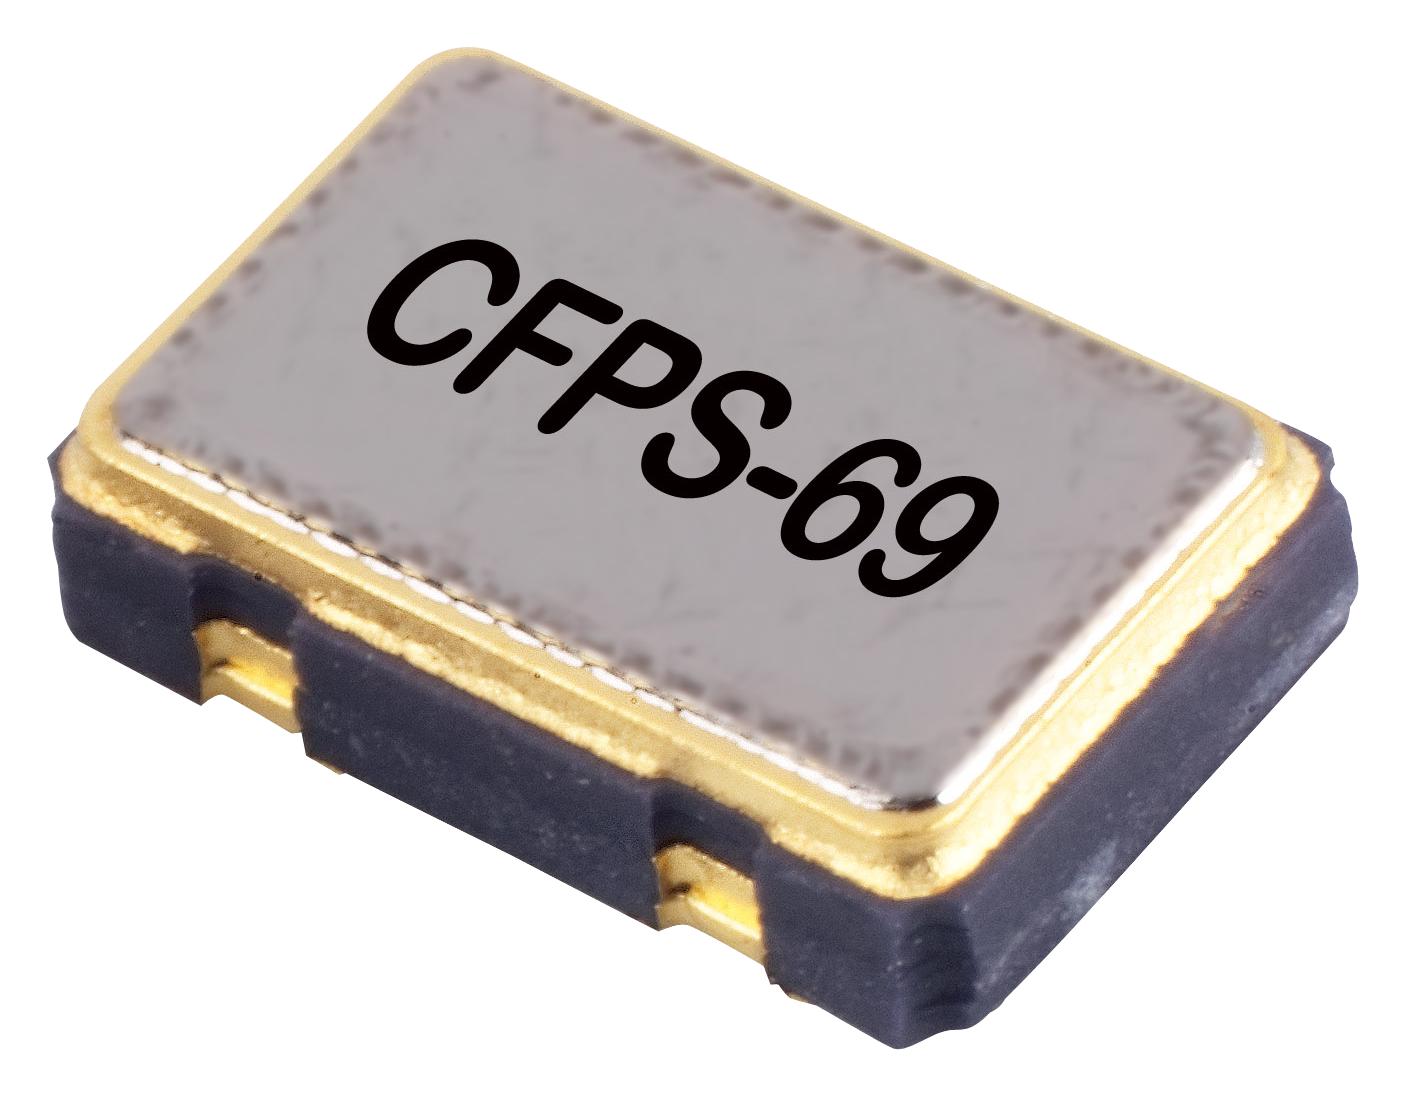 LFSPXO009590 CRYSTAL OSCILLATOR, SMD, 32MHZ IQD FREQUENCY PRODUCTS